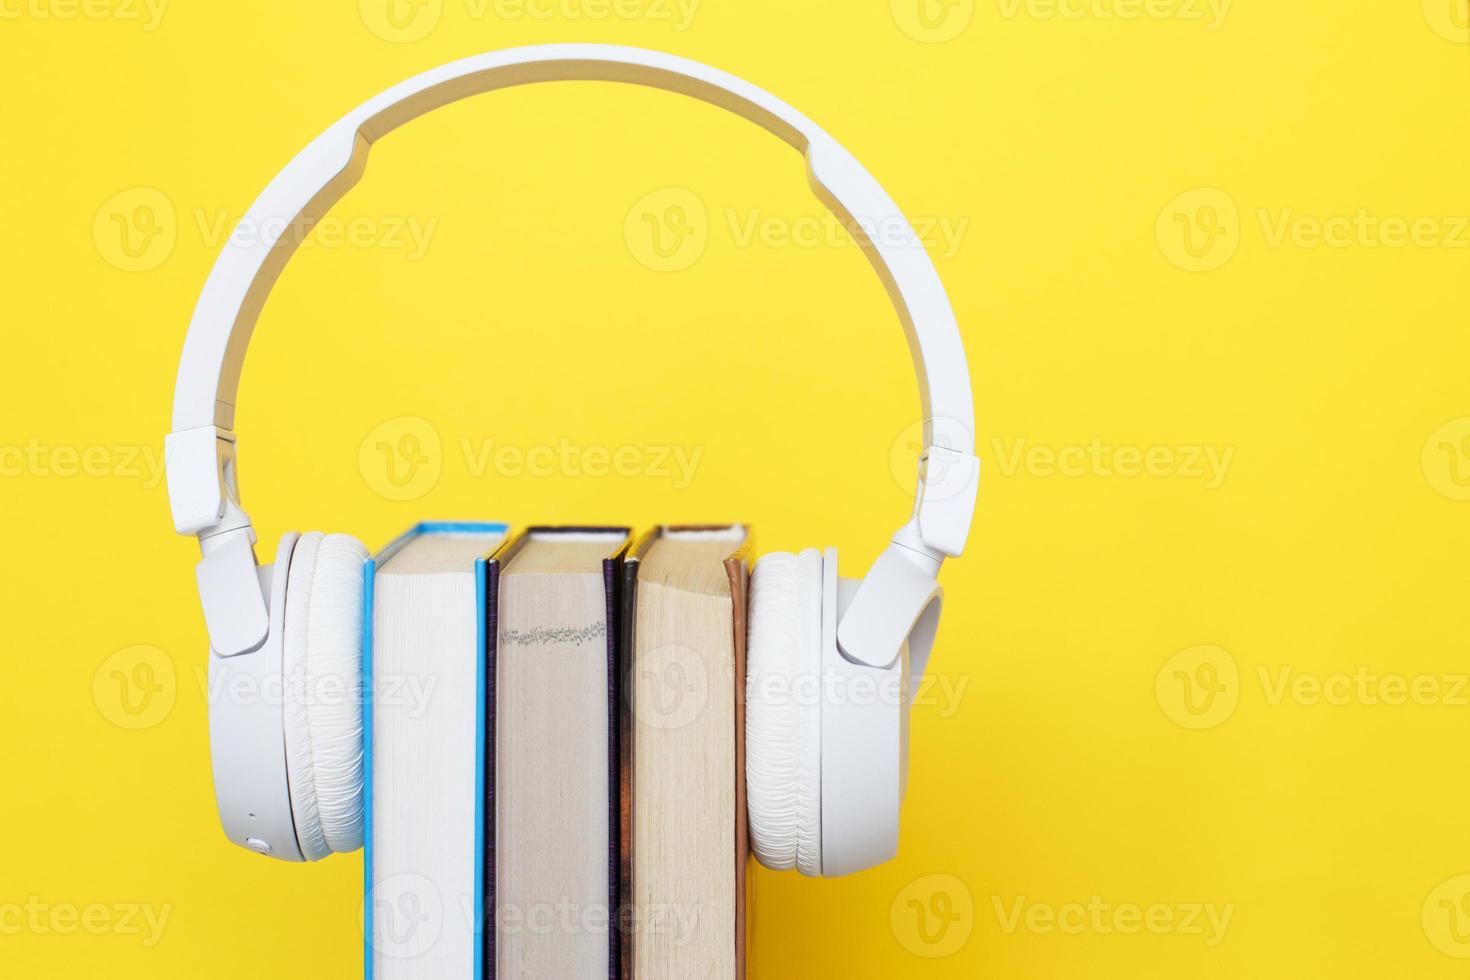 Audio book concept with modern white headphones and hardcover book on a yellow background. Listening to a book. photo